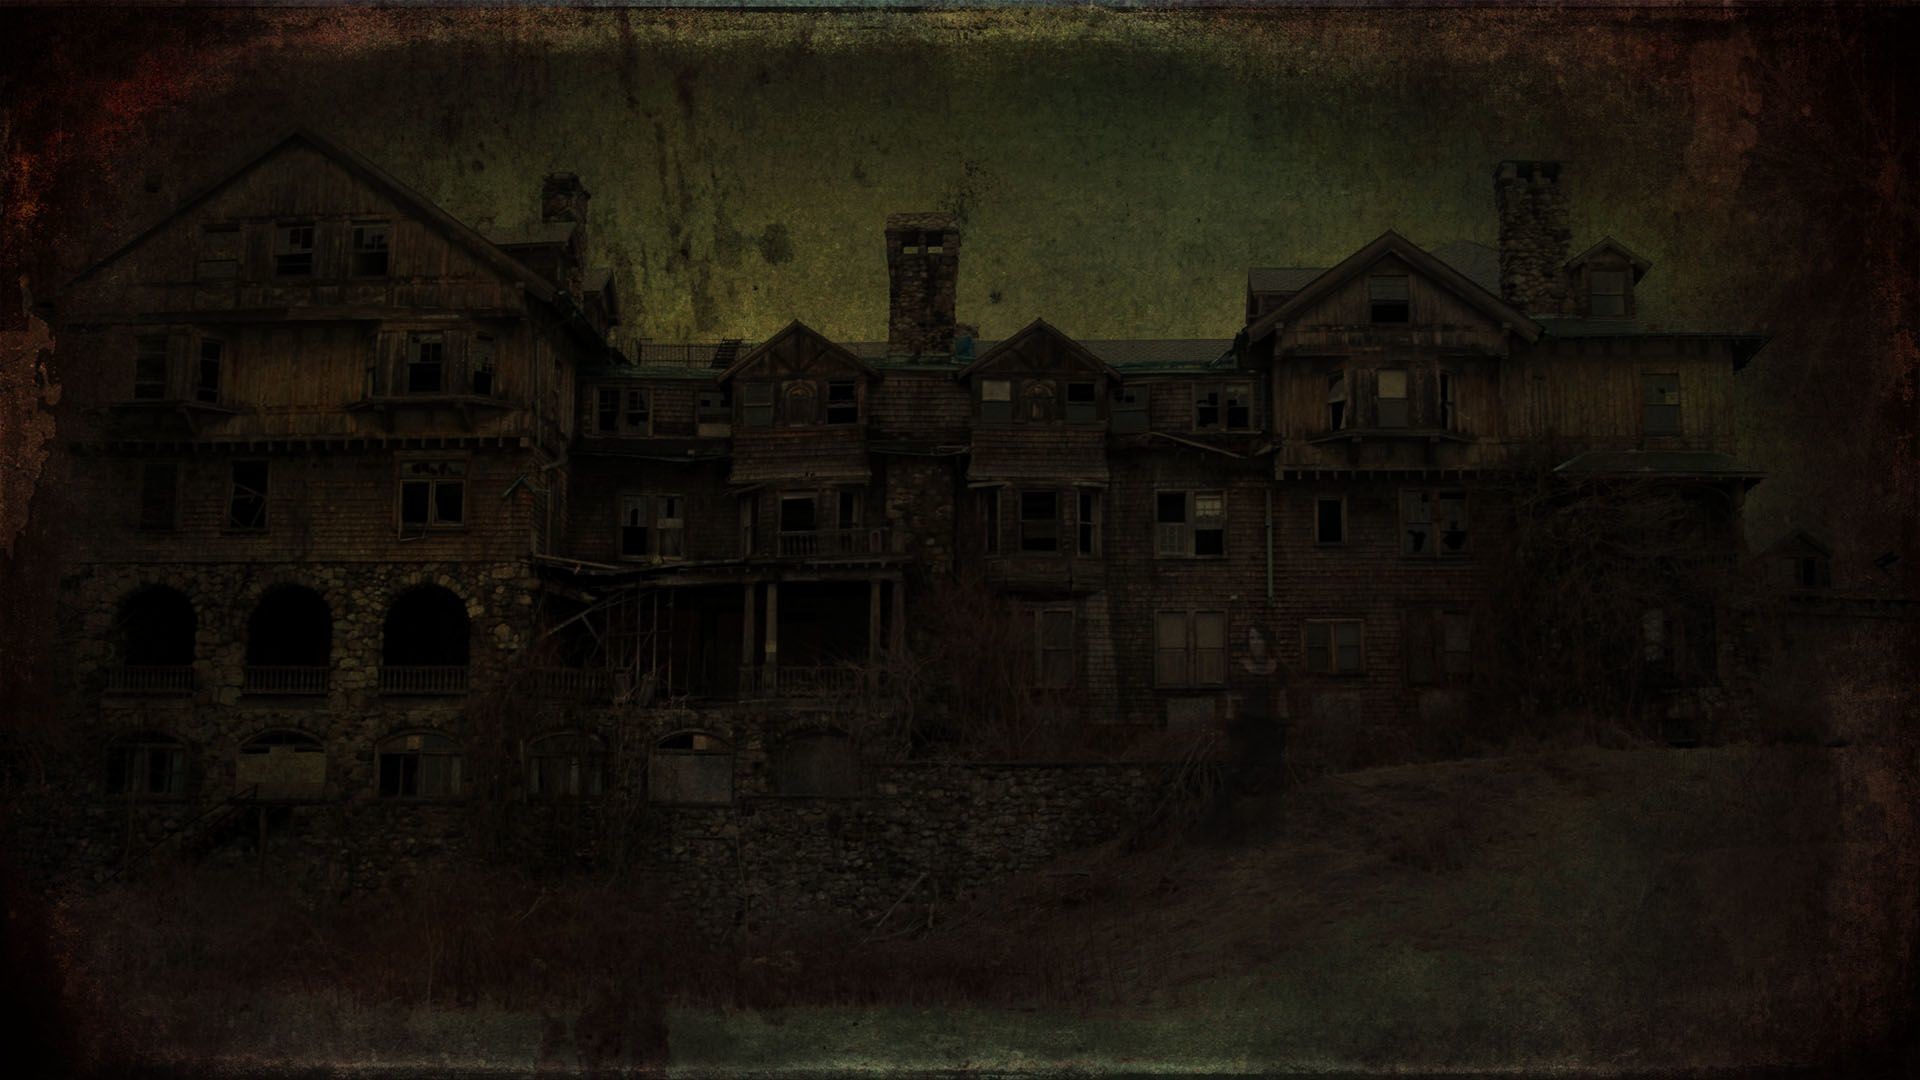 1920x1080 Android Wallpaper Review: Haunted House HD | Android Central